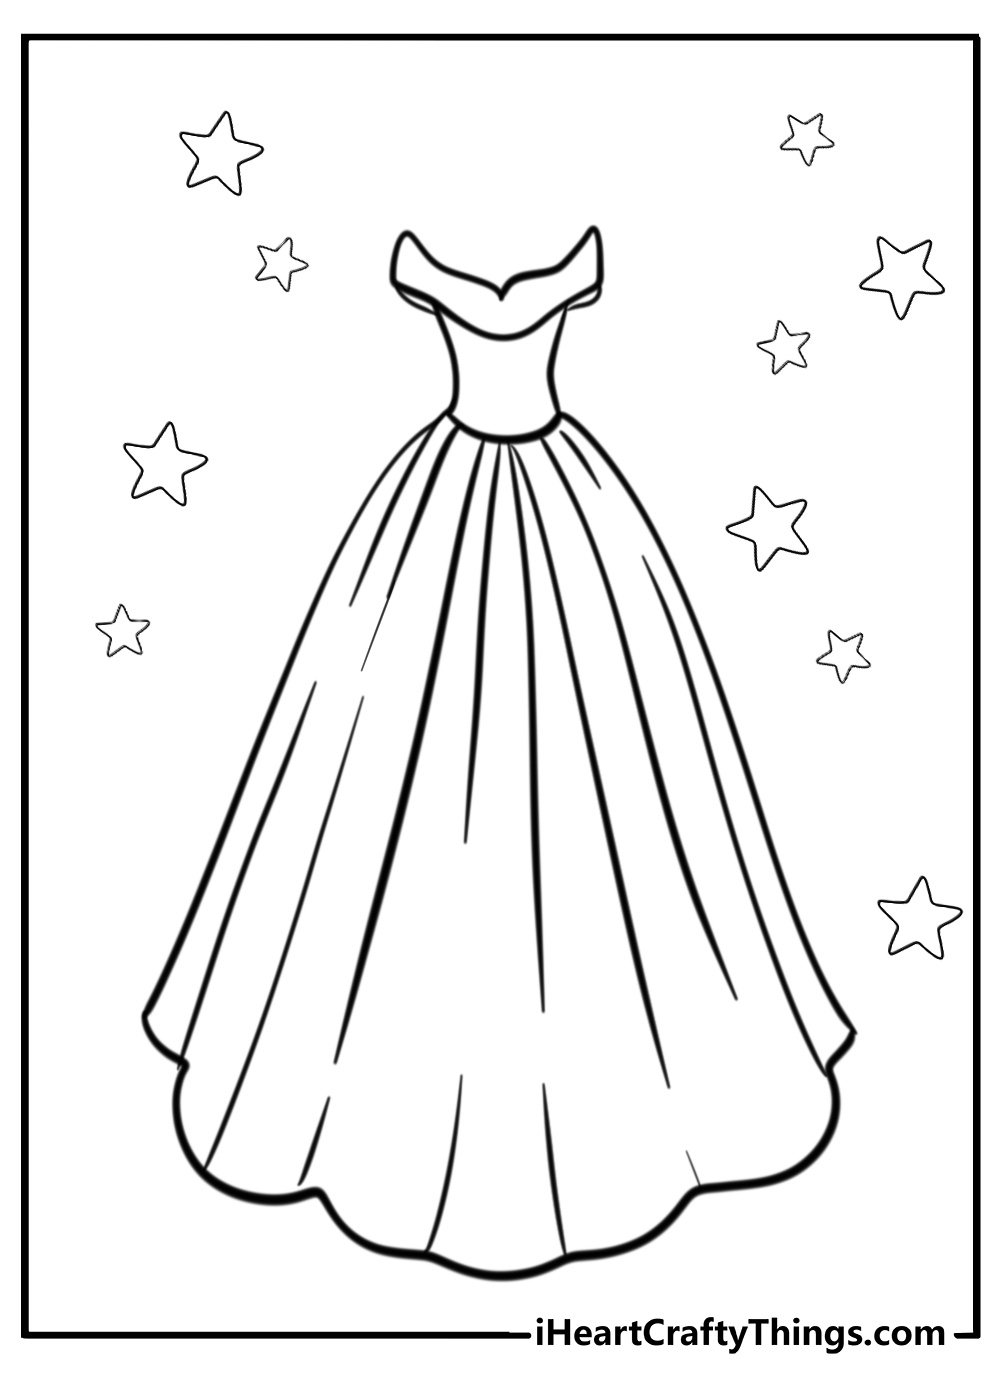 Dress coloring page of off shoulder princess ball gown